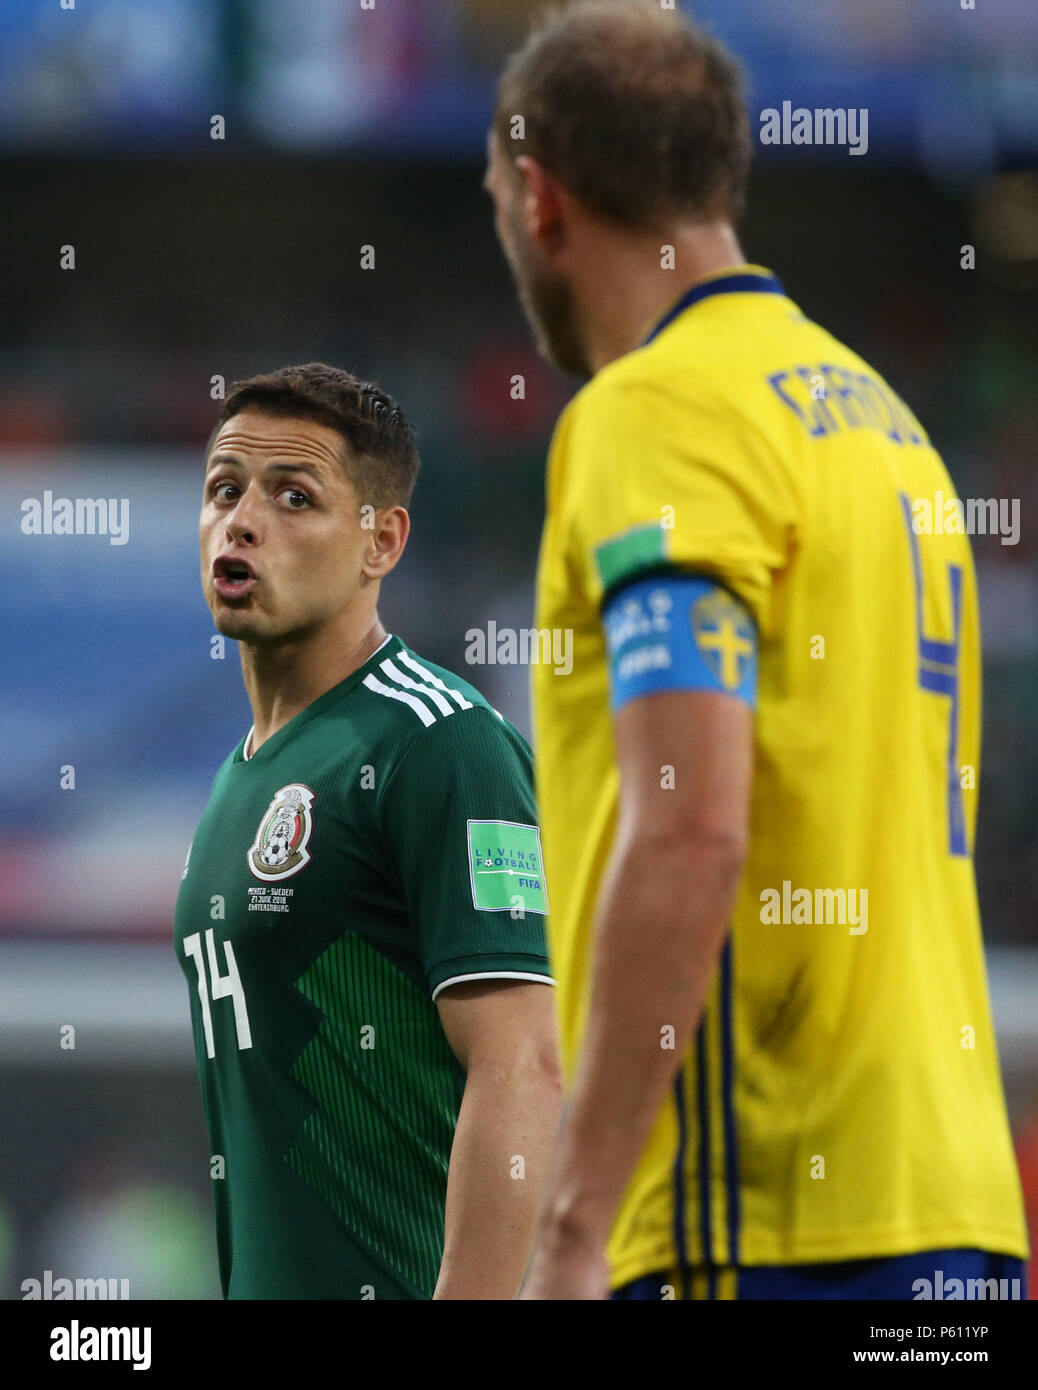 Yekaterinburg, Russia. 27th June, 2018. Javier Hernandez (L) of Mexico reacts during the 2018 FIFA World Cup Group F match between Mexico and Sweden in Yekaterinburg, Russia, June 27, 2018. Sweden won 3-0. Mexico and Sweden advanced to the round of 16. Credit: Li Ming/Xinhua/Alamy Live News Stock Photo